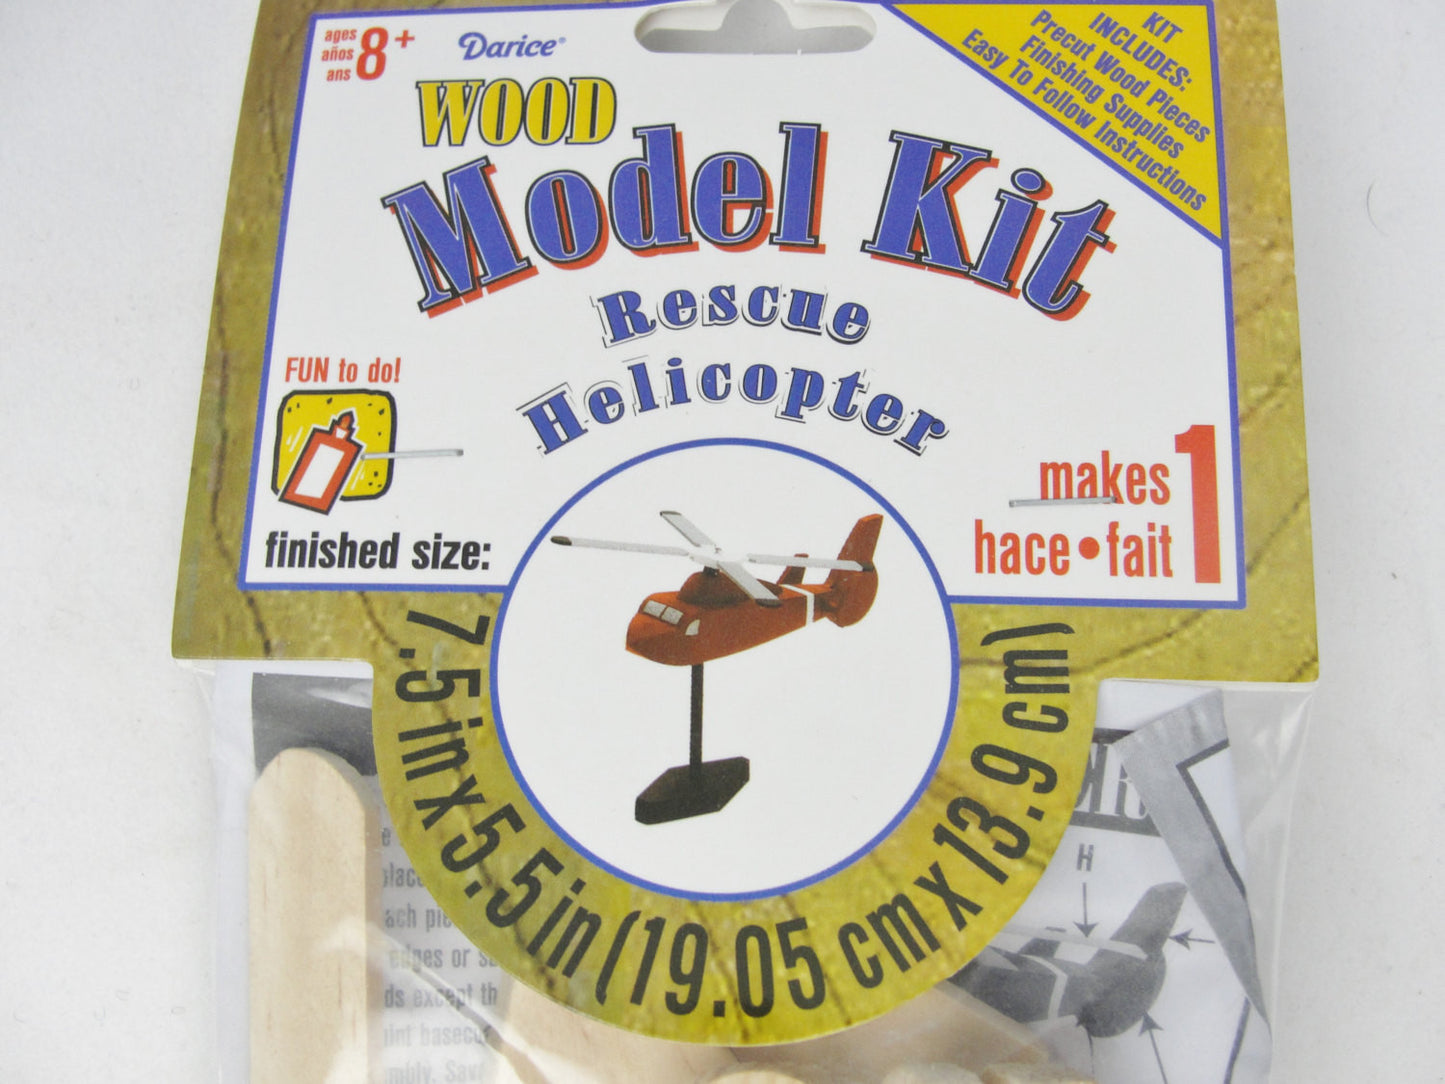 Rescue helicopter wood model kit - Model kits - Craft Supply House